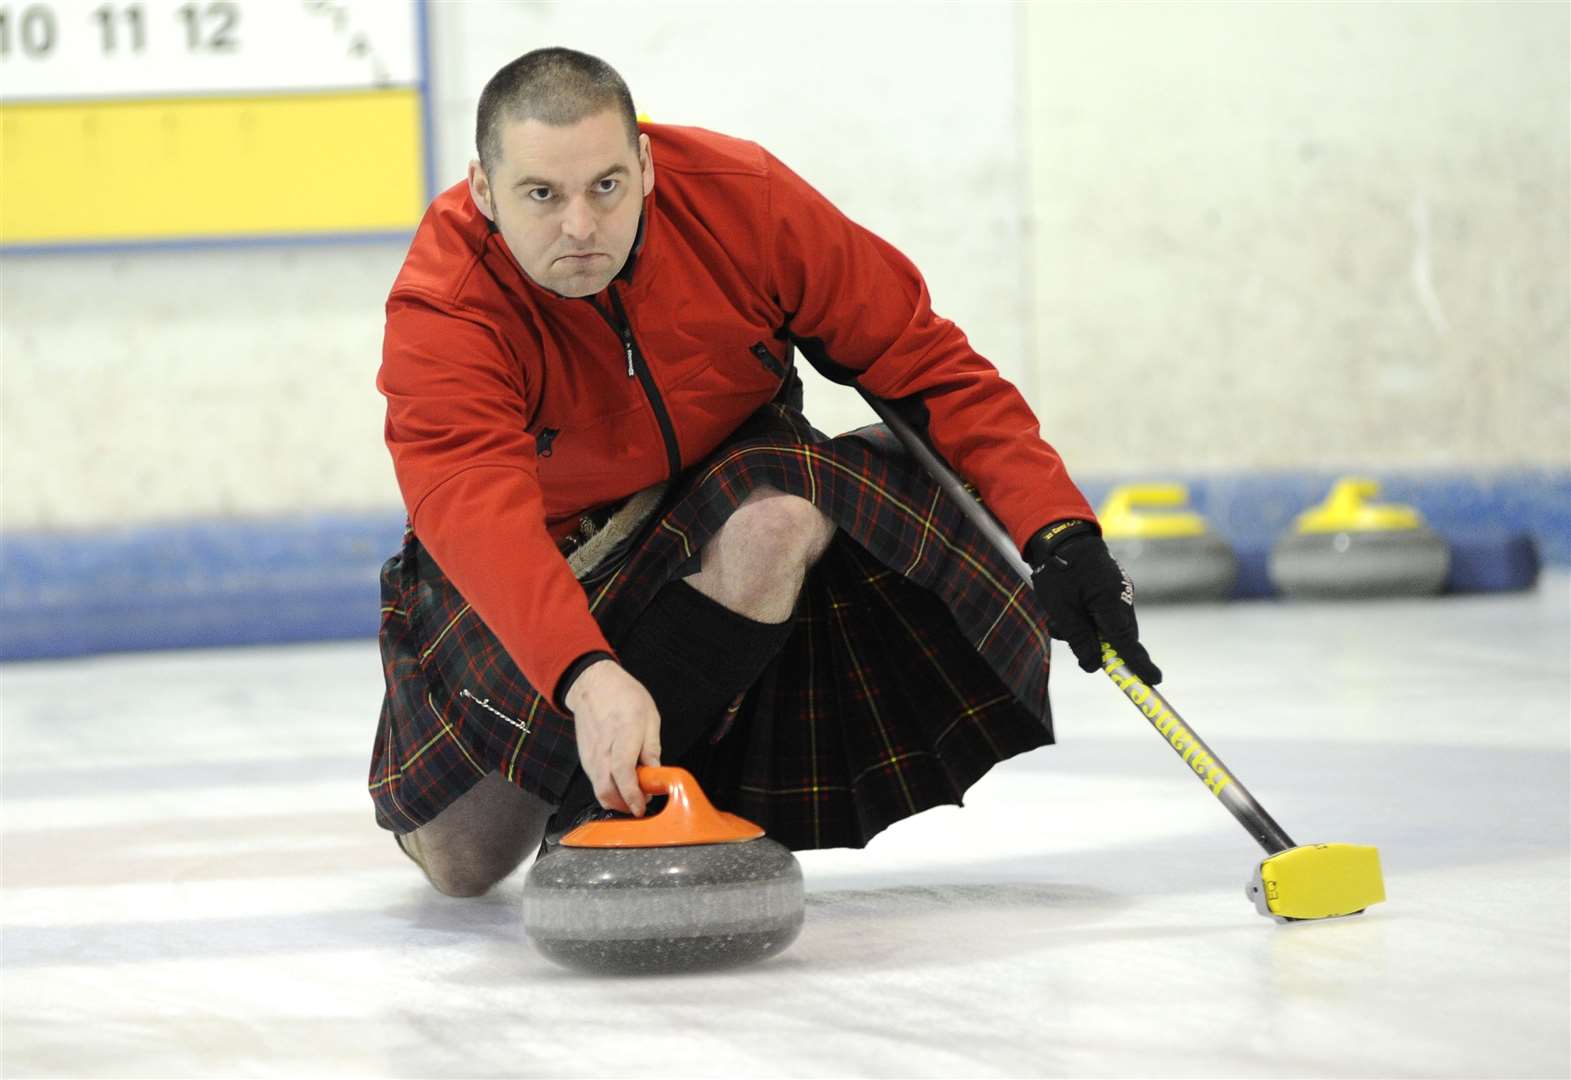 Moray Province East curling latest from Moray Leisure Centre - Northern Scot